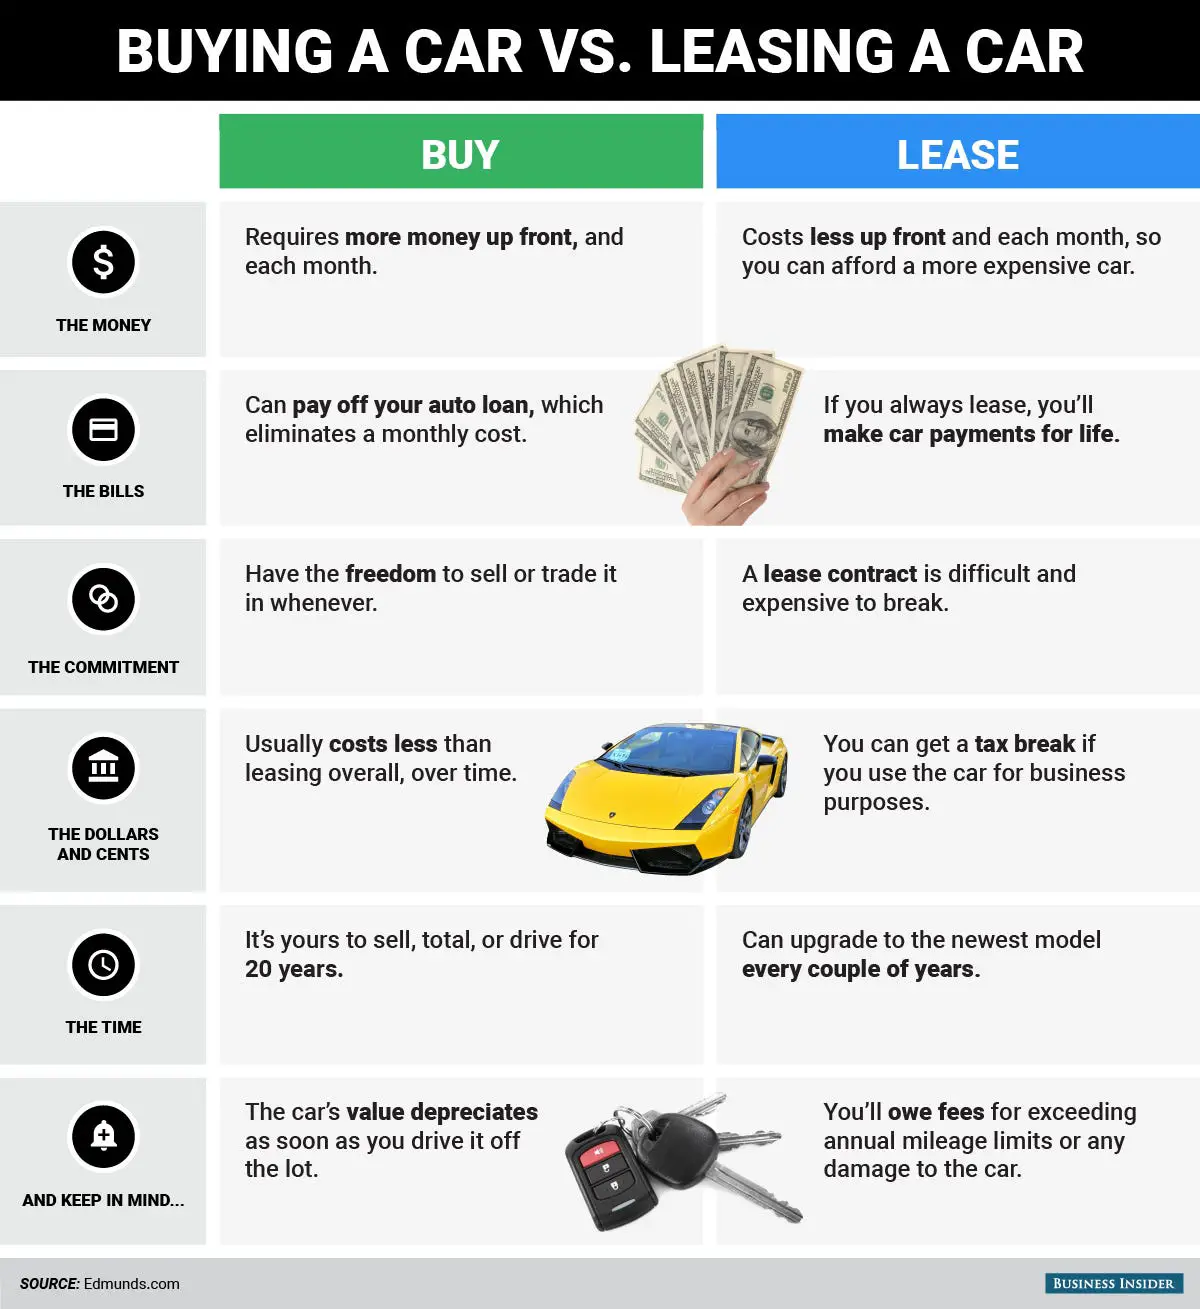 Leasing vs Buying a Vehicle